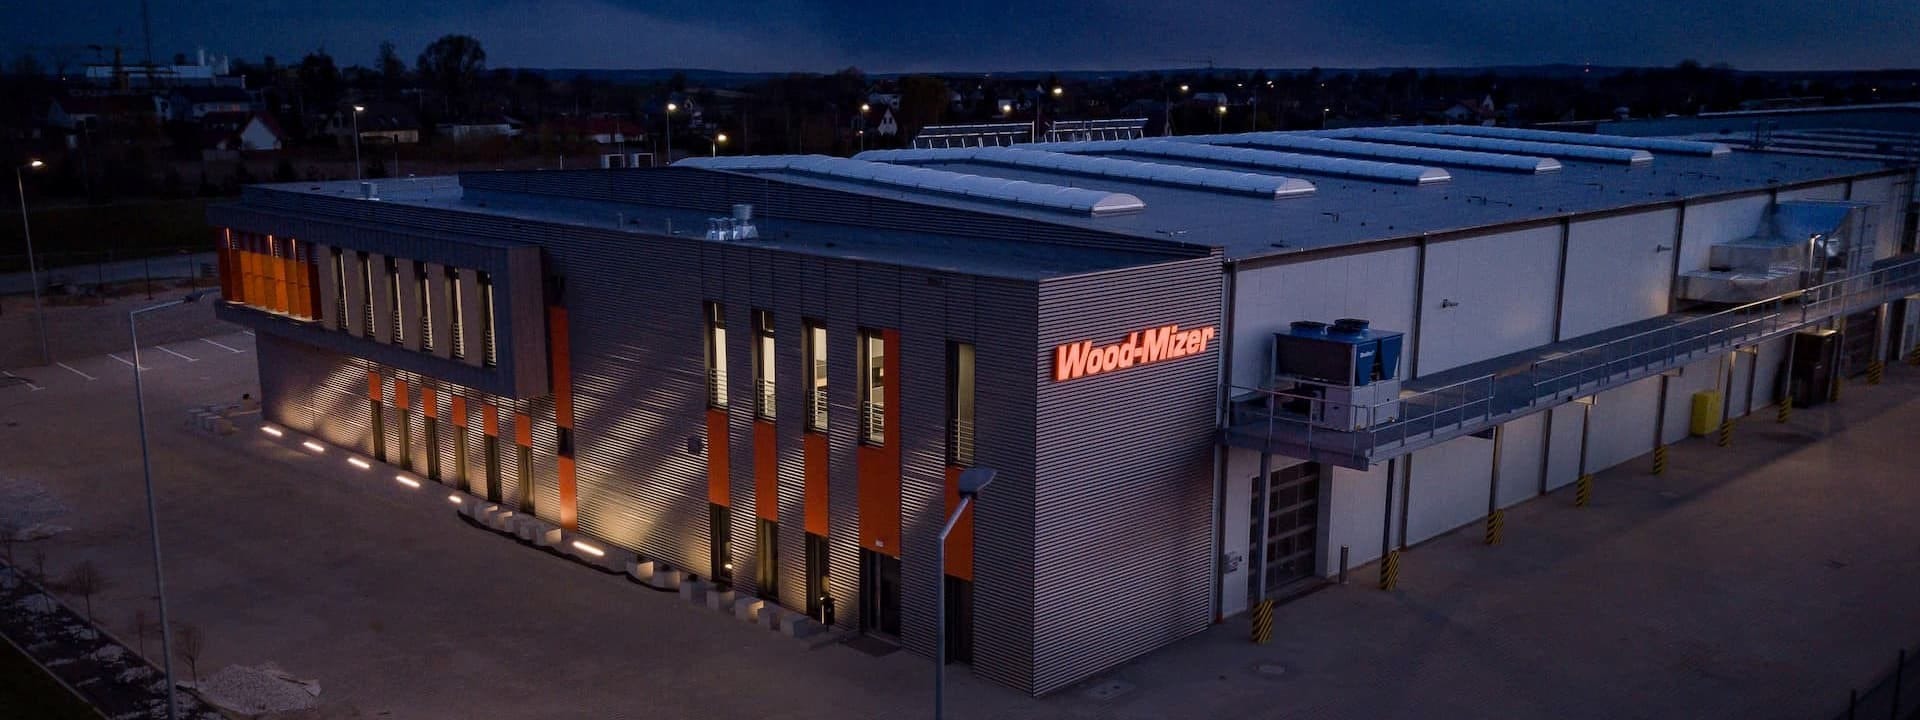 New Wood-Mizer facility in Poland built in 2021